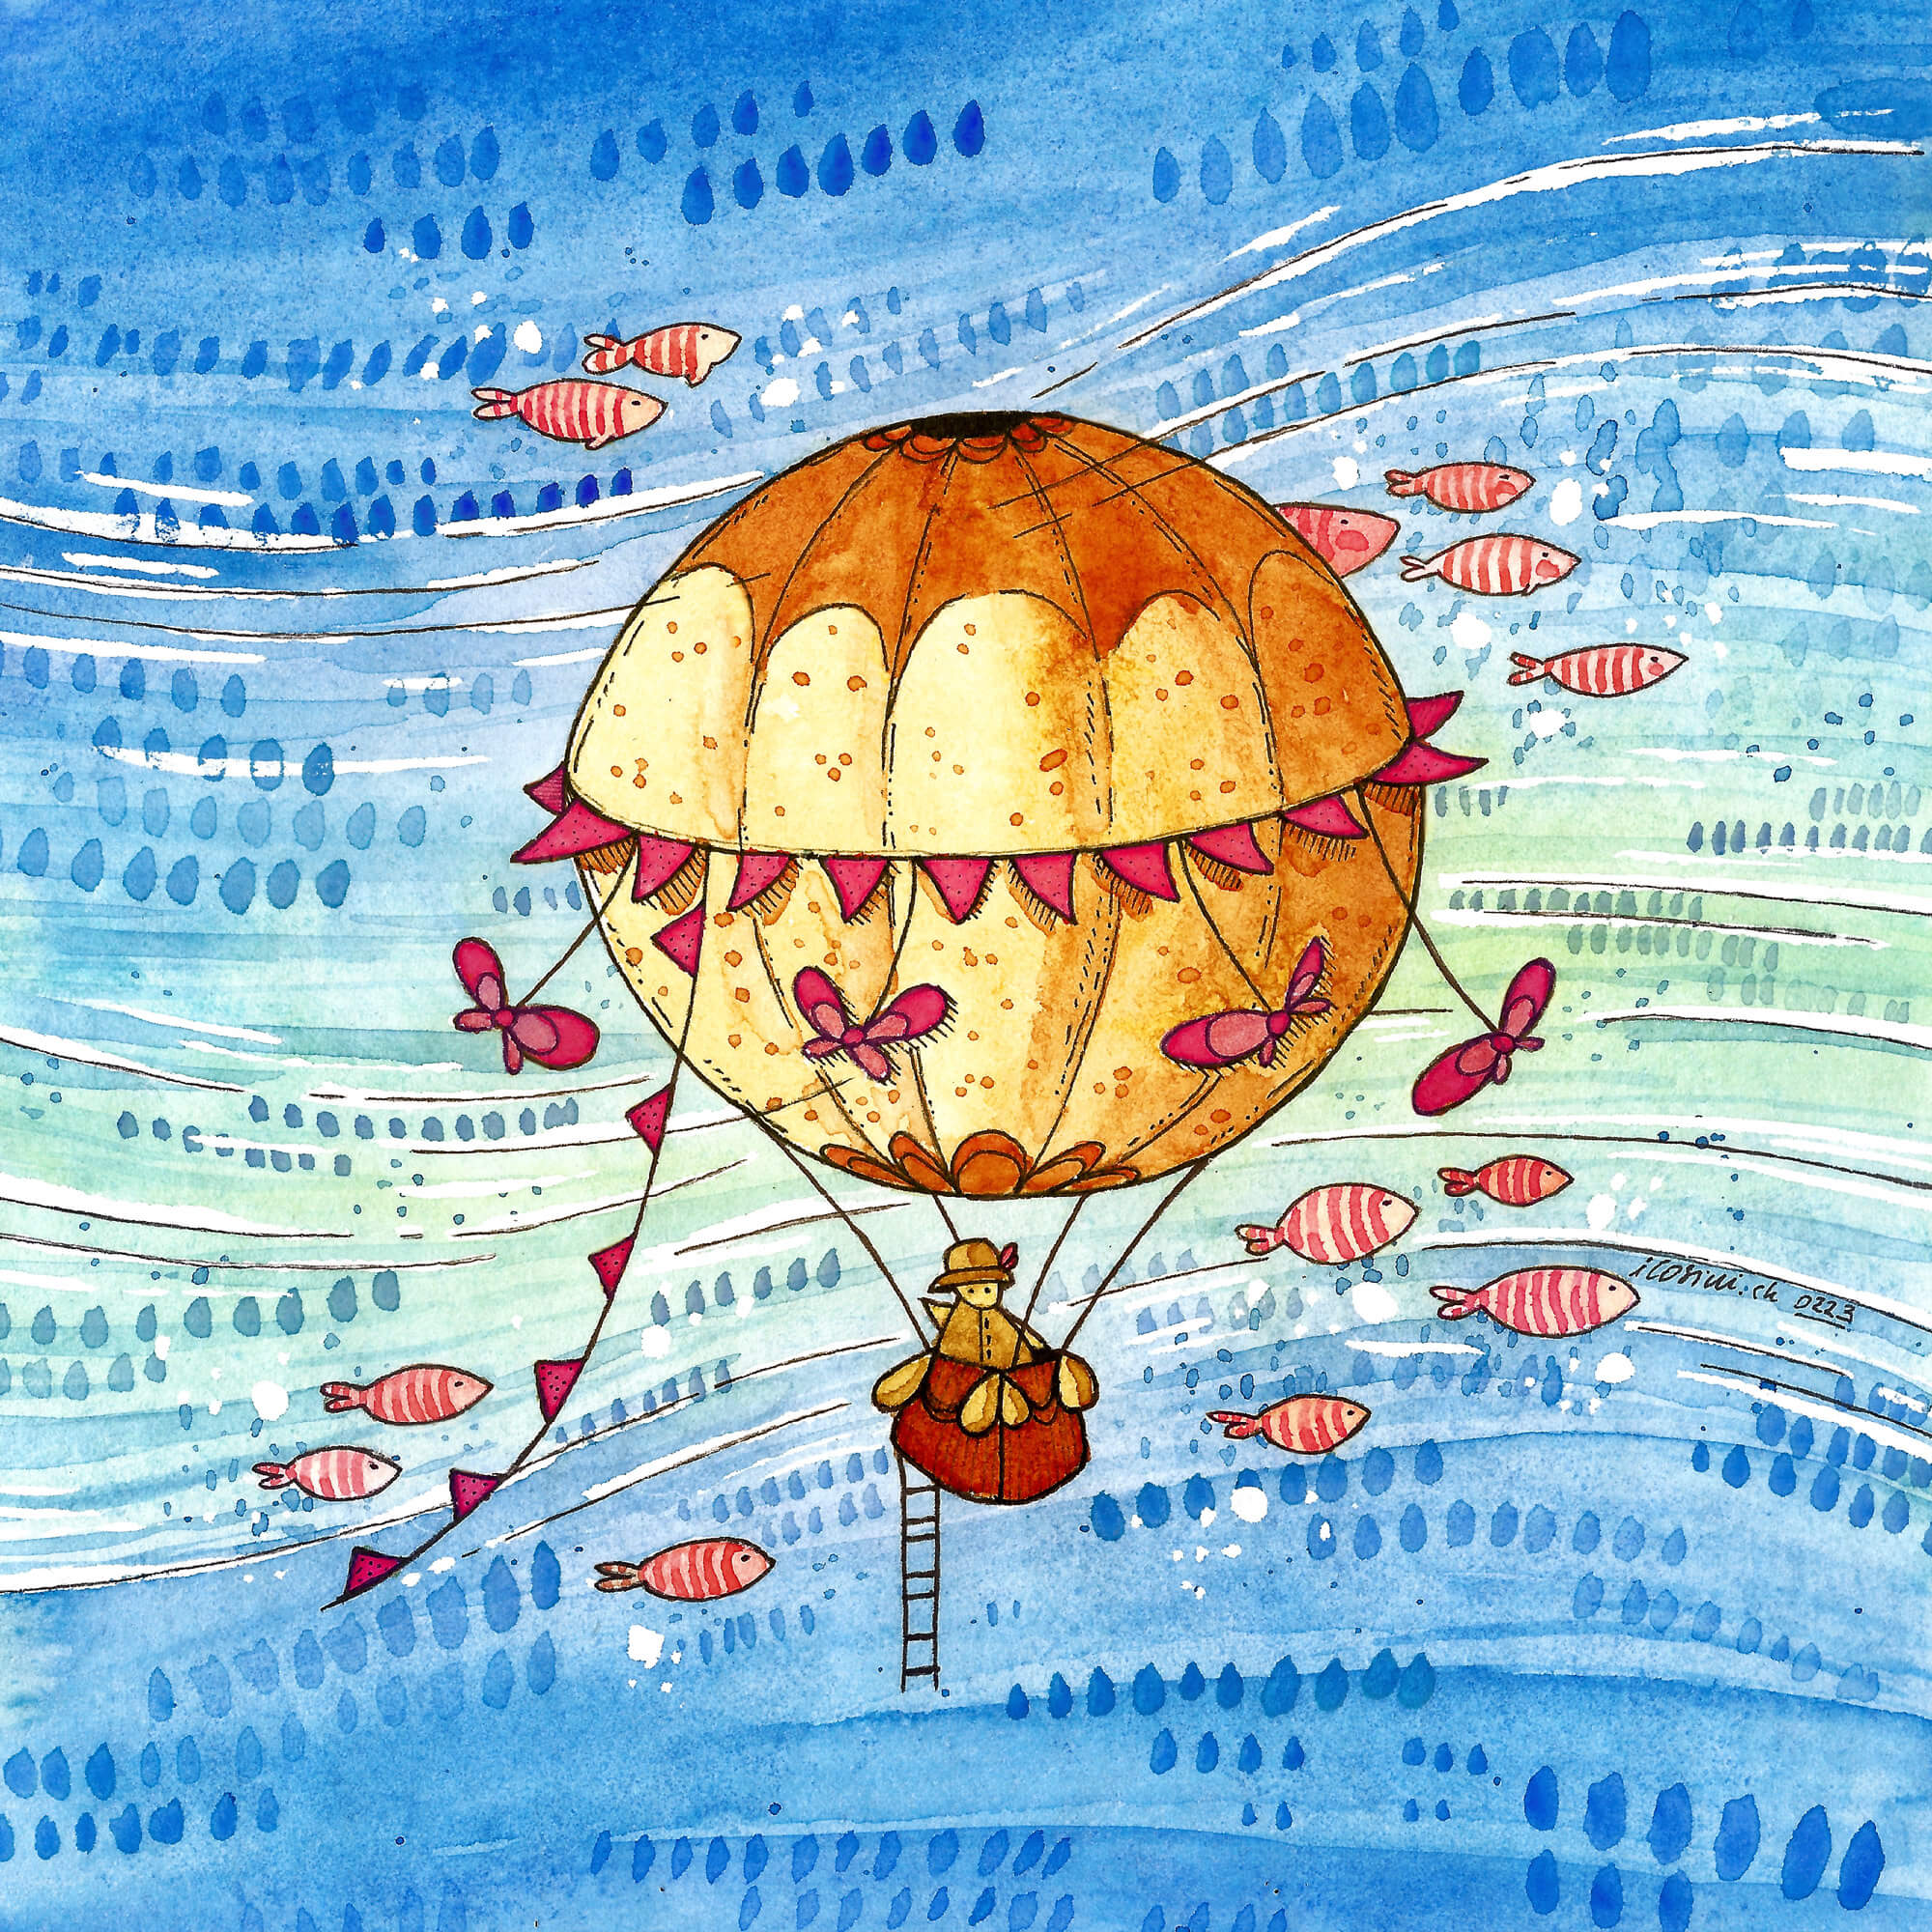 Commissioned illustration of a hot-air balloon flying among fish